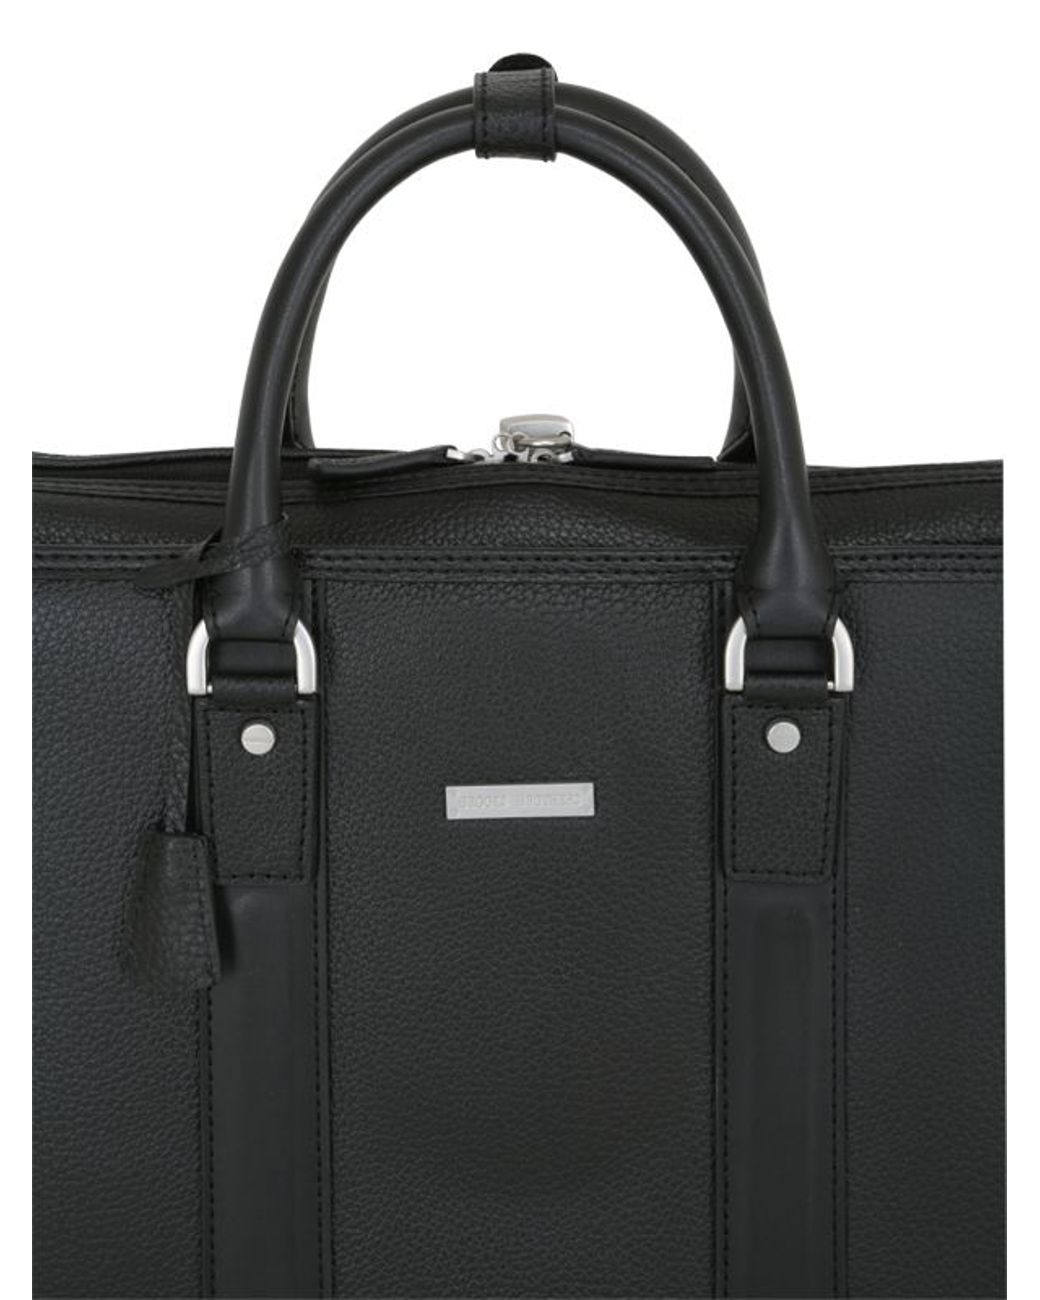 Insert NR Brooks Brothers LNWOT Brooks Brothers Black Grained Leather Double Gusset Briefcase 